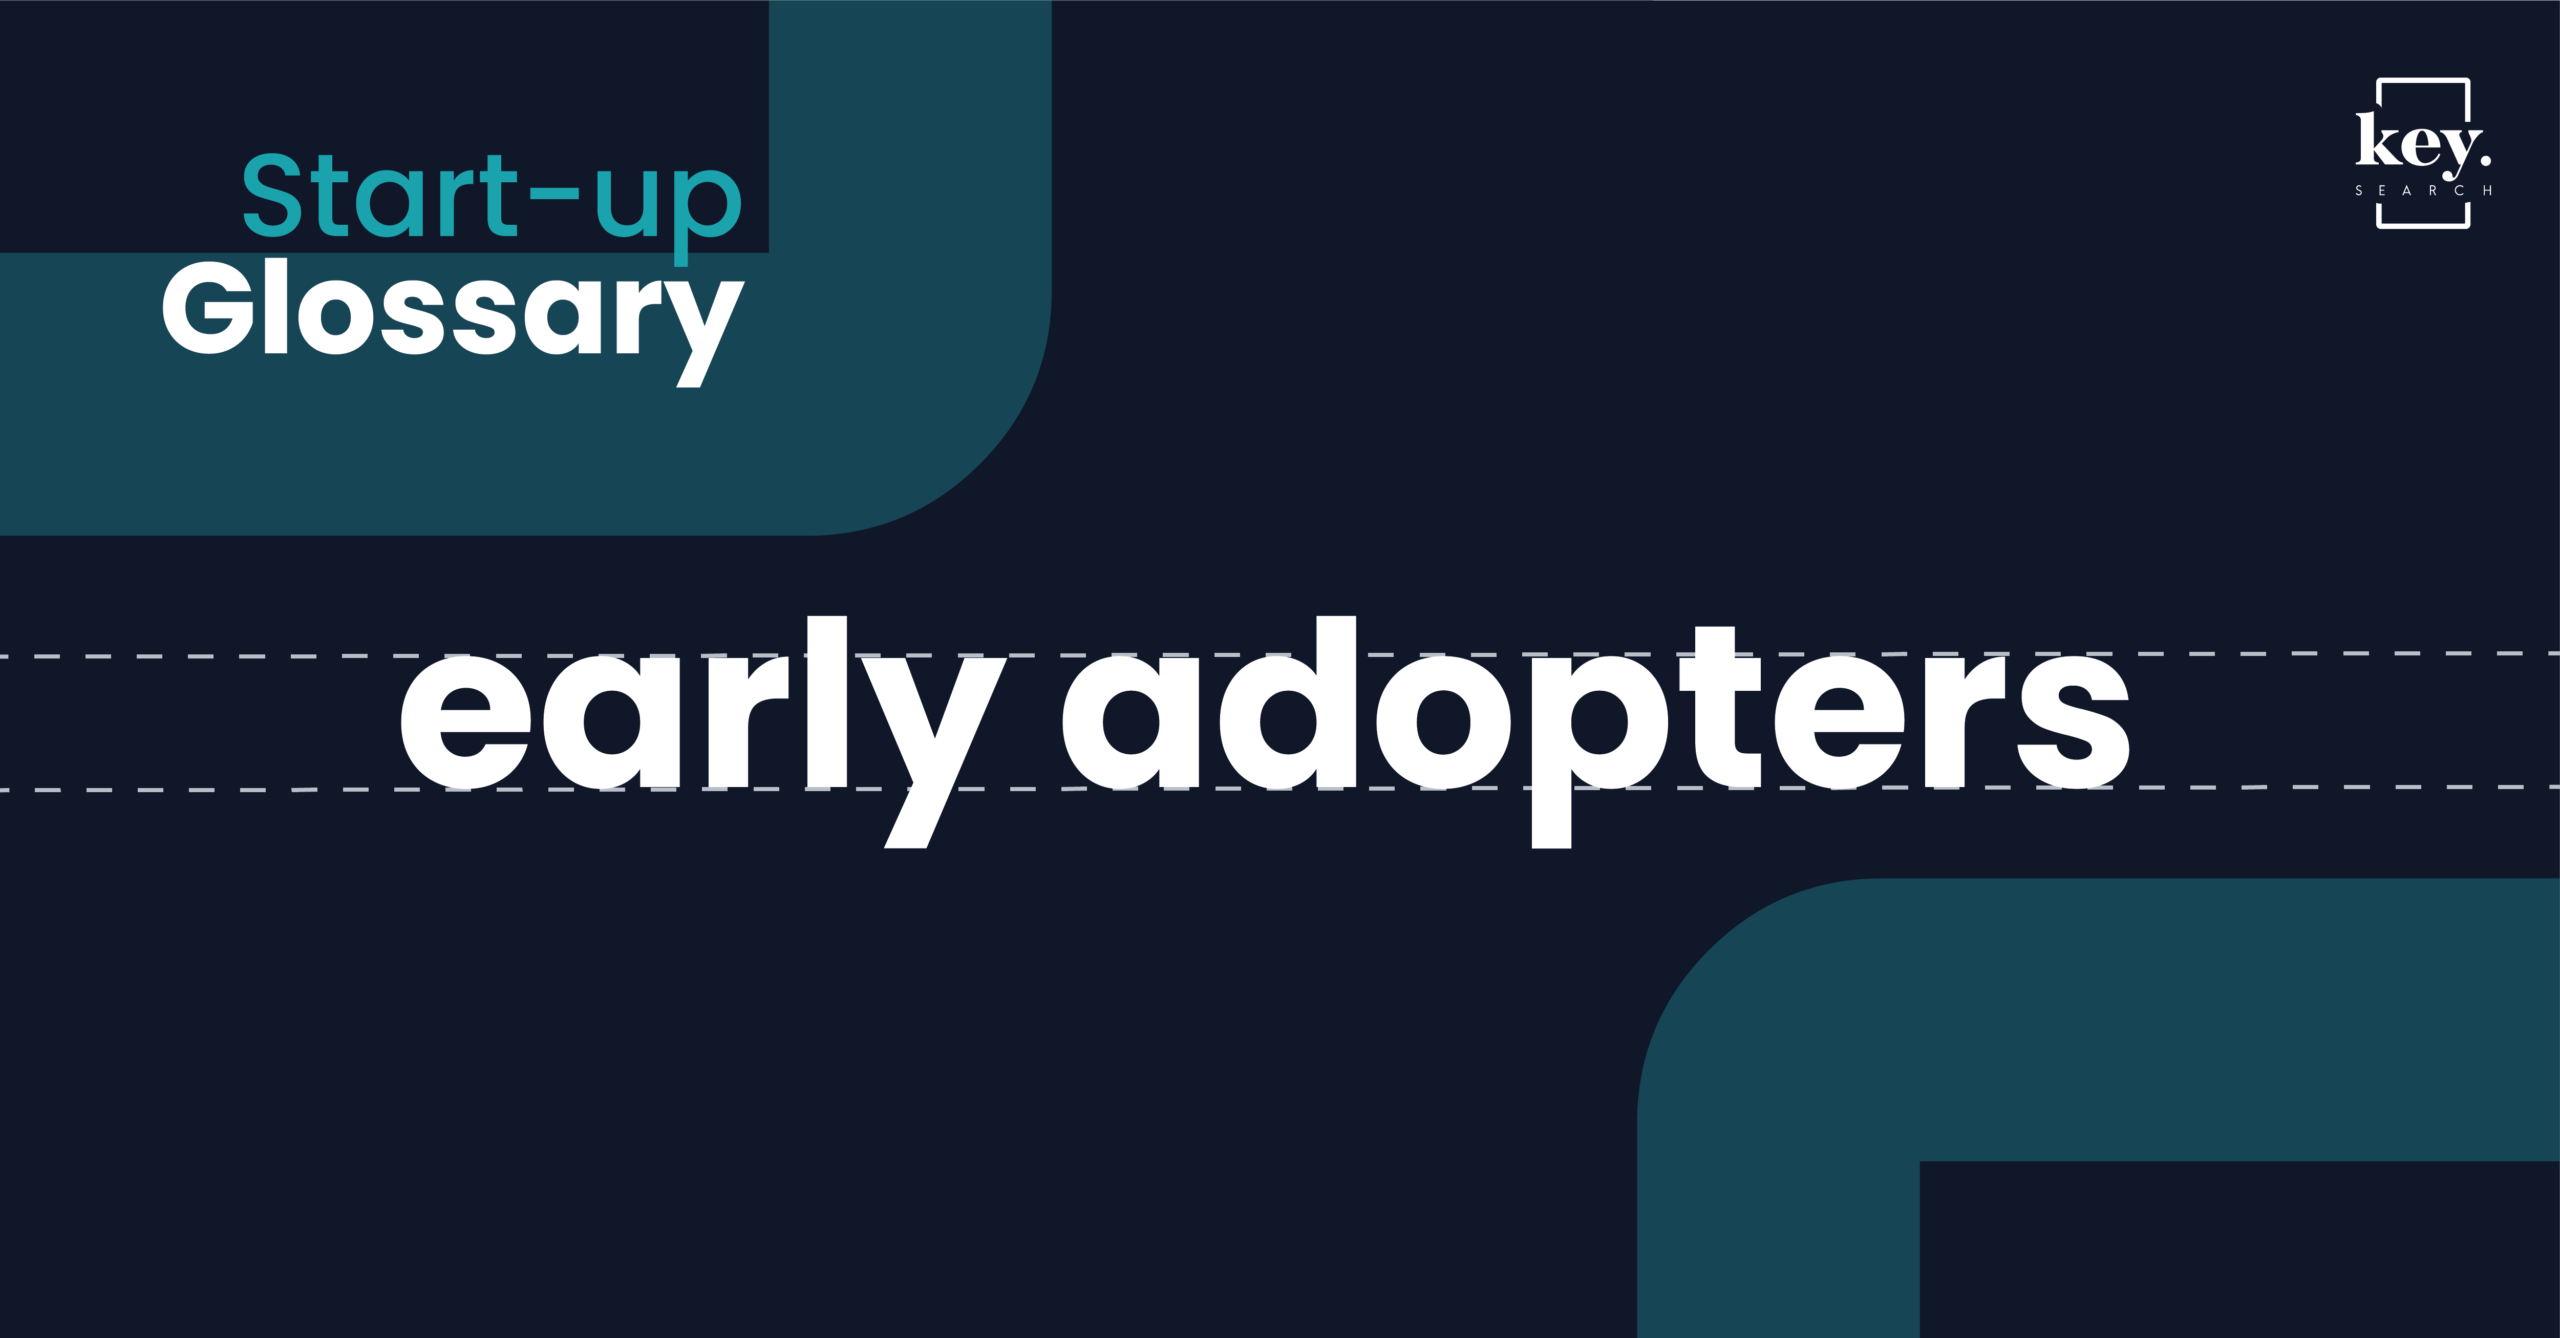 Start-up Glossary_Early adopters